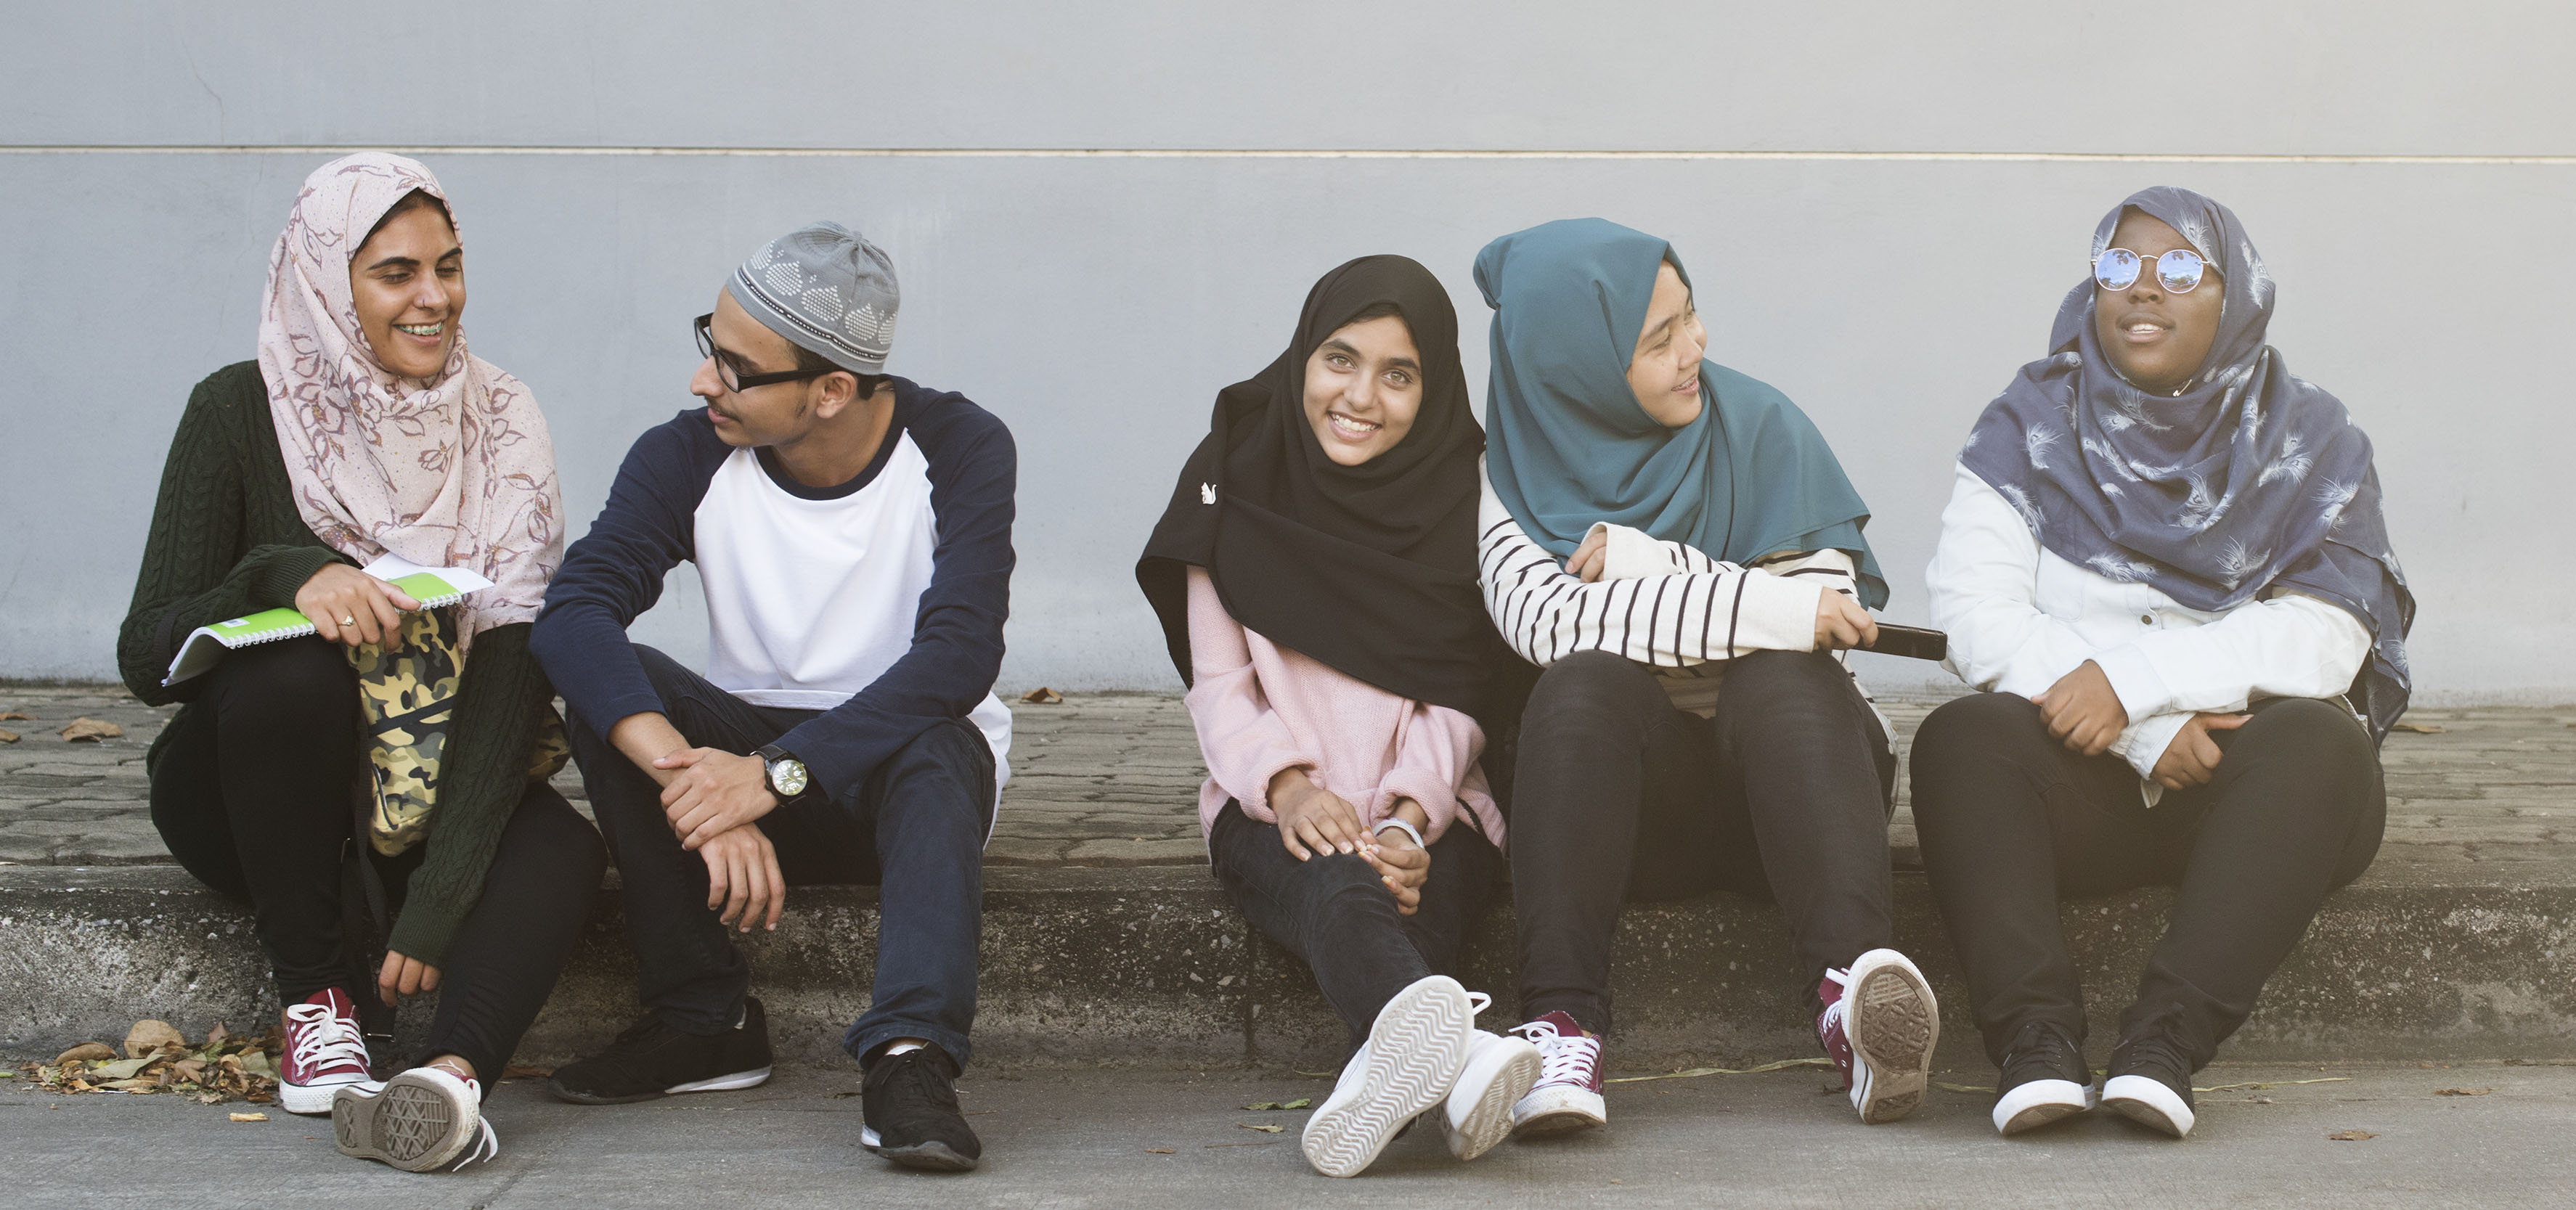 3548px x 1667px - 11 Ways to Build modesty in Young Muslims | SoundVision.com